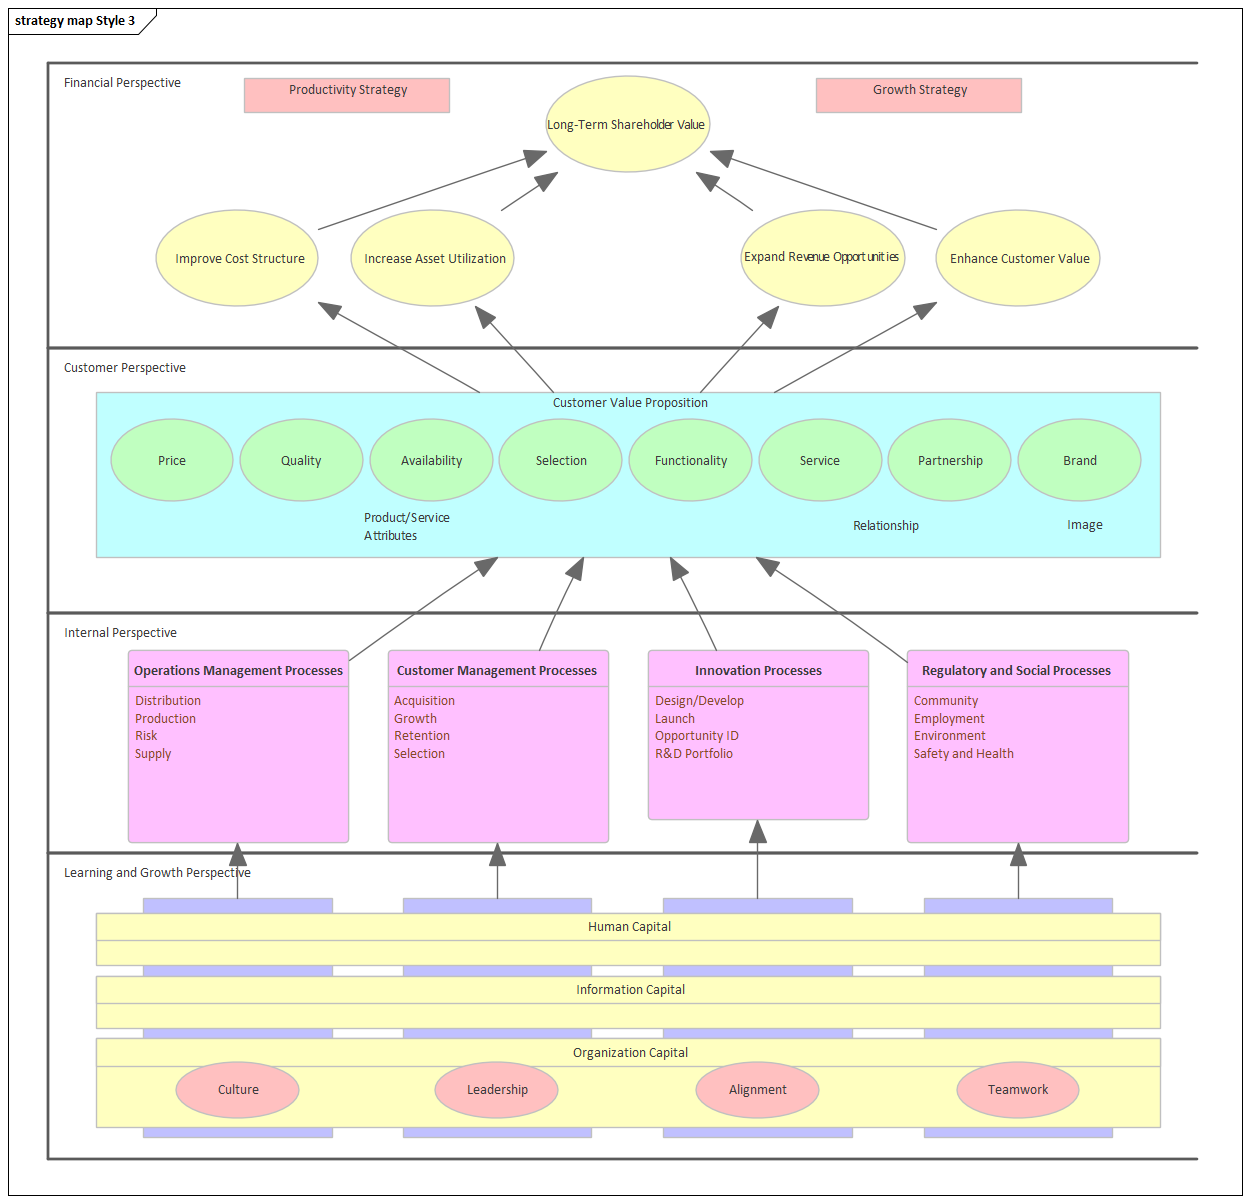 Business Strategy Map diagram (Style 3) in Sparx Systems Enterprise Architect